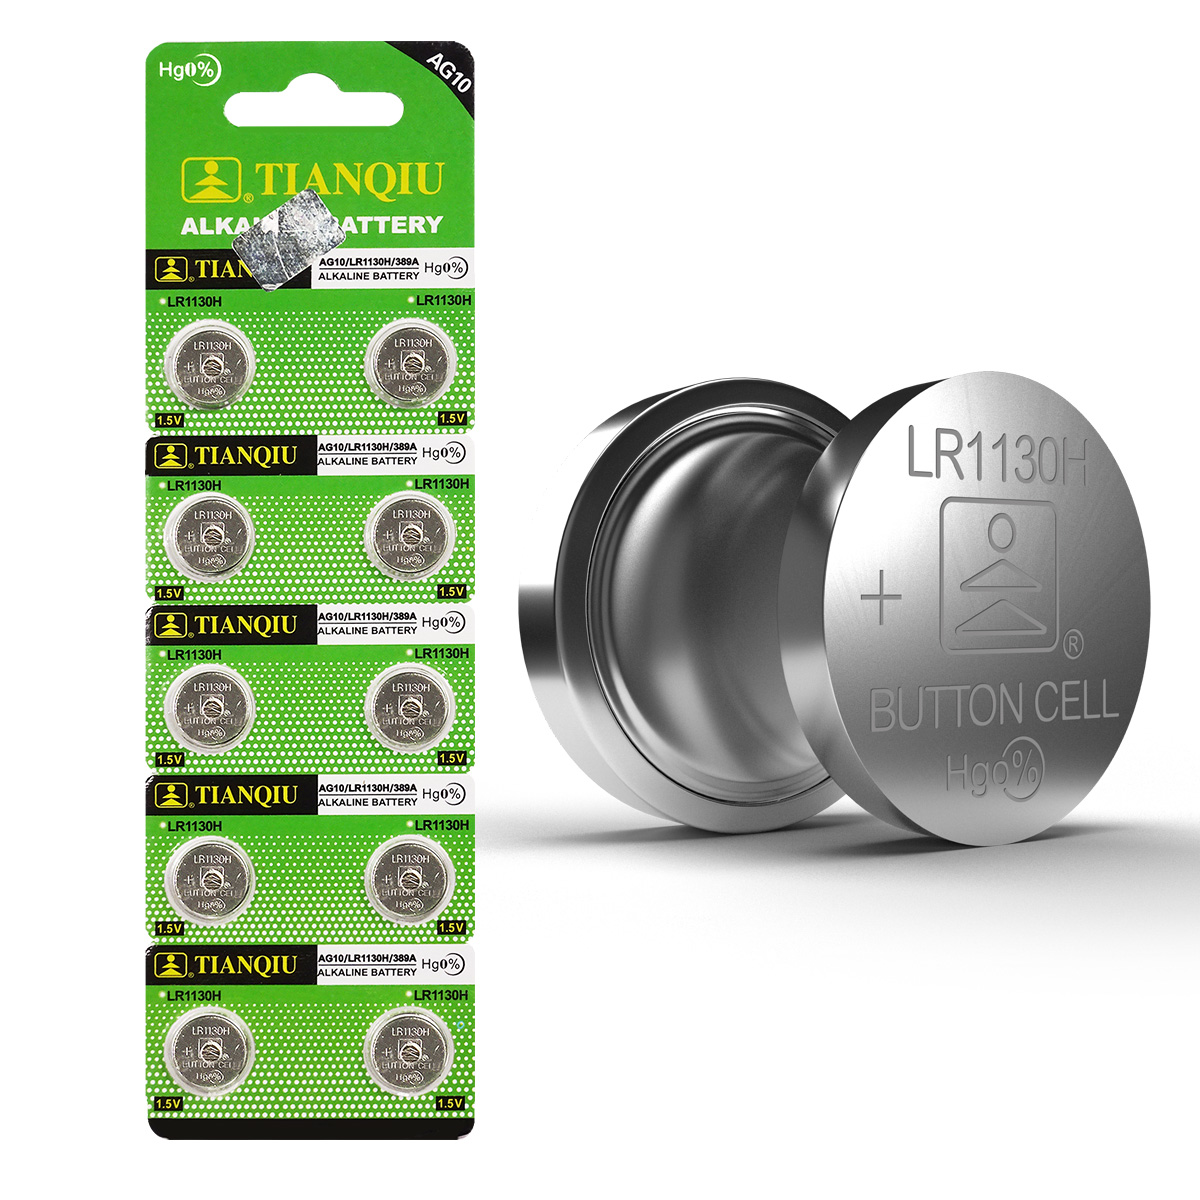 LR1130 Watch Battery Replacement, Cross Reference and Equivalent to 189